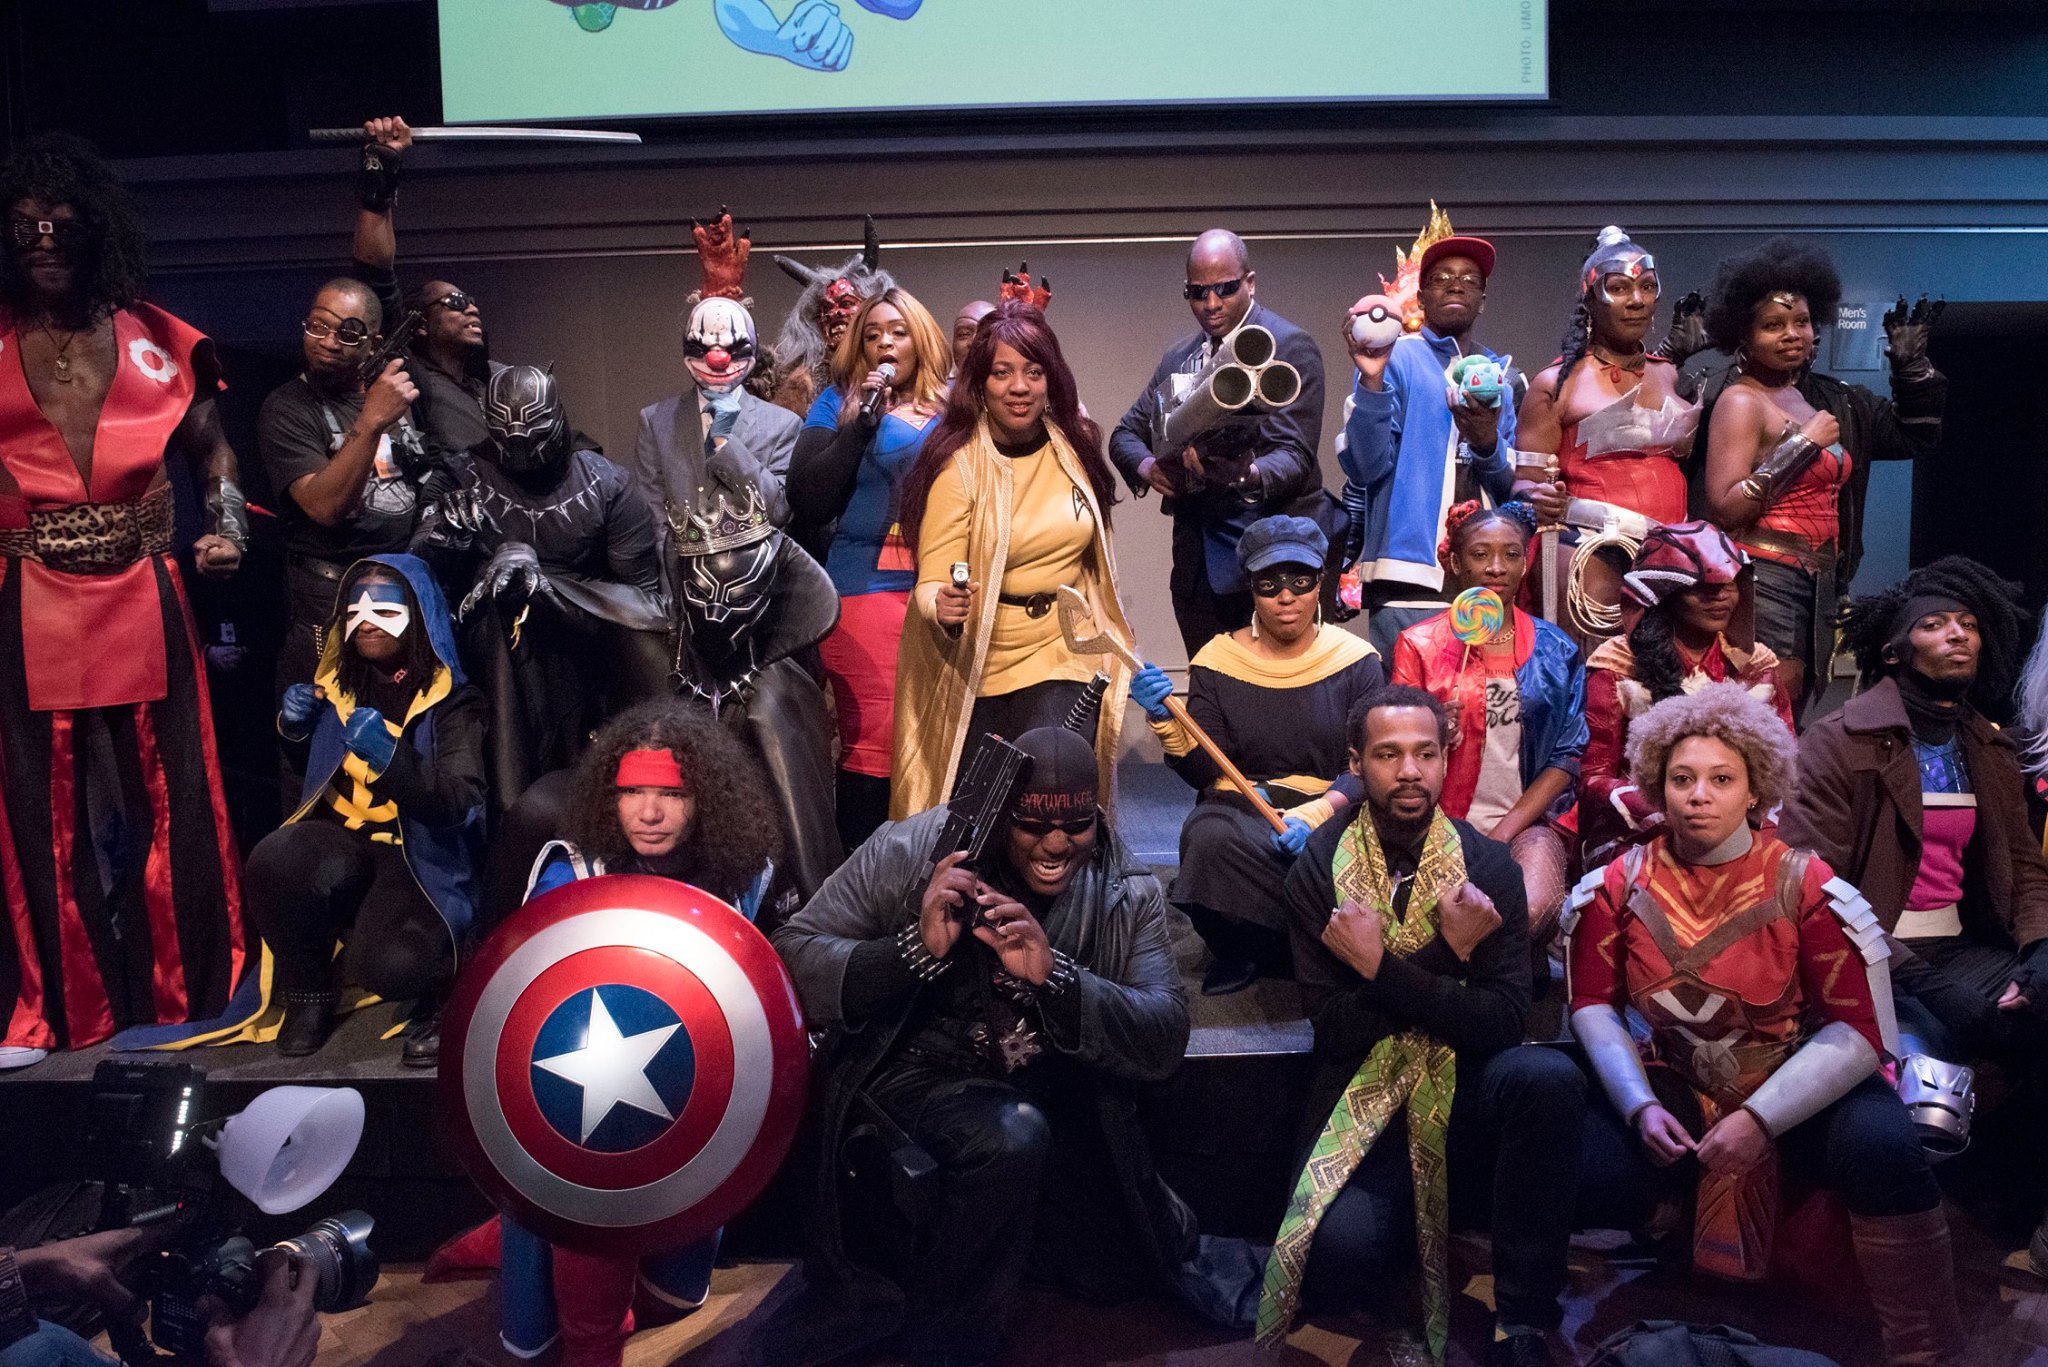 A group of Black cosplayers pose together for a group photo.